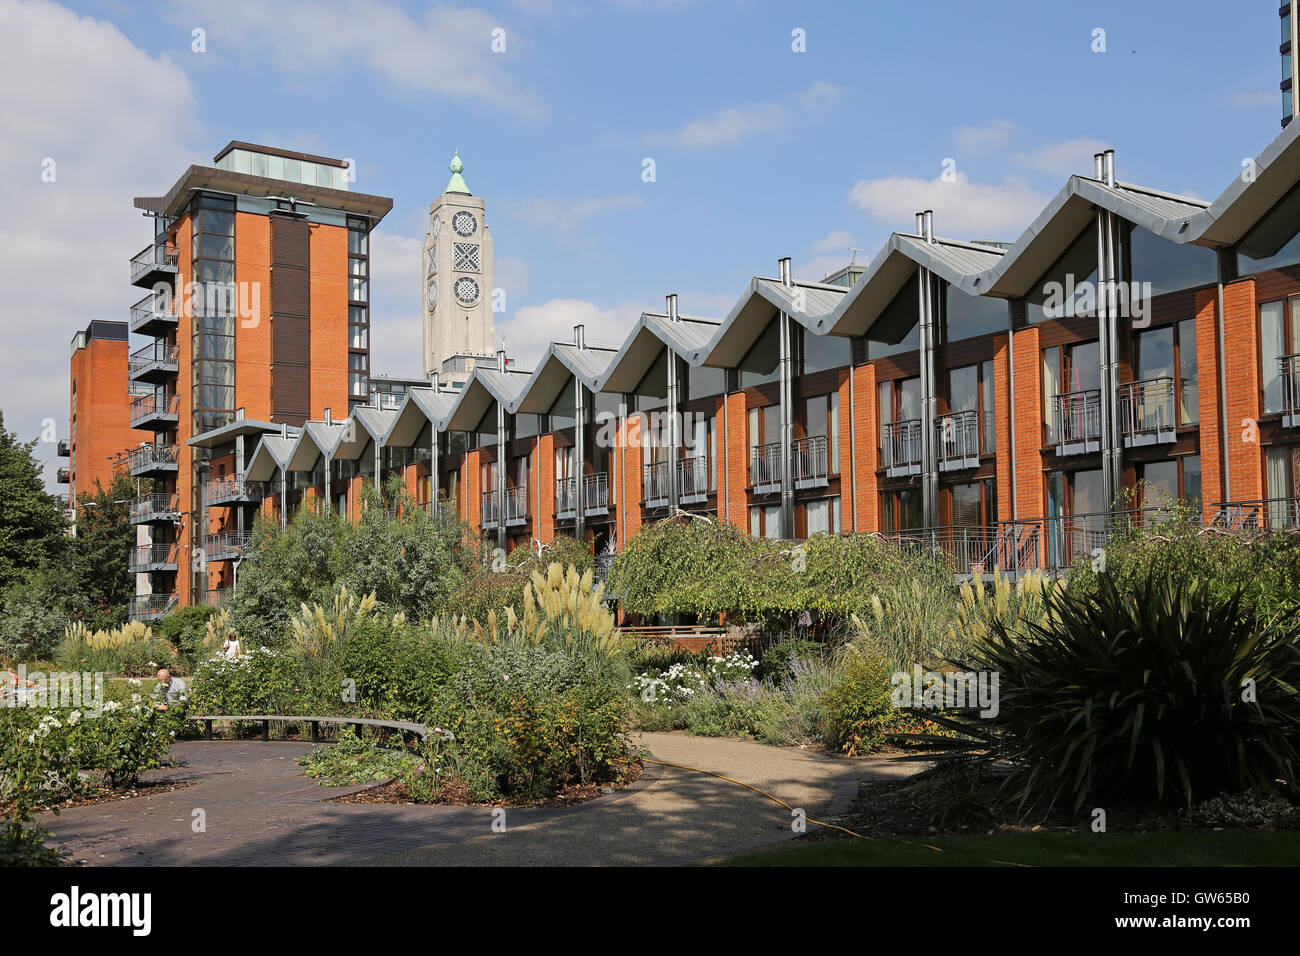 Gardens in front of town houses and apartments in London's Coin Street community housing scheme on the south bank of the Thames Stock Photo